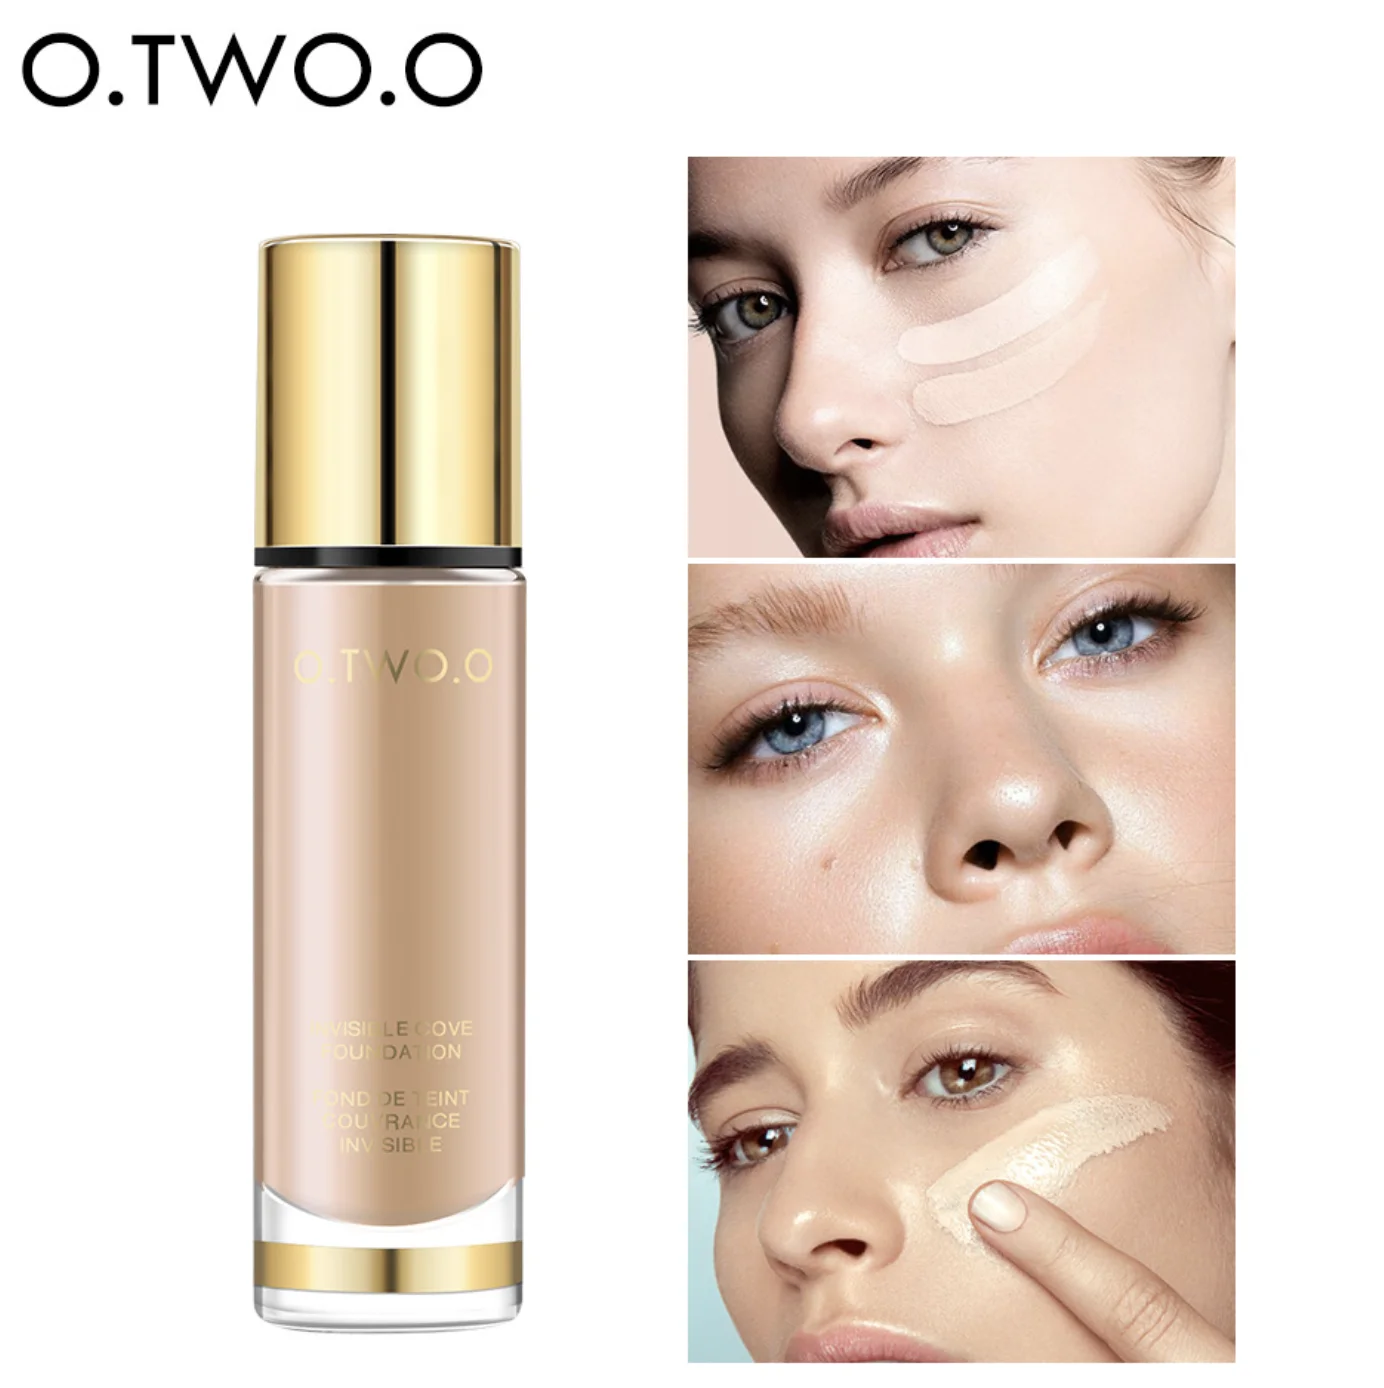 

1 PACK O.TWO.O gold natural makeup liquid foundation flawless cover invisible pores bb cream moisturizing liquid foundation